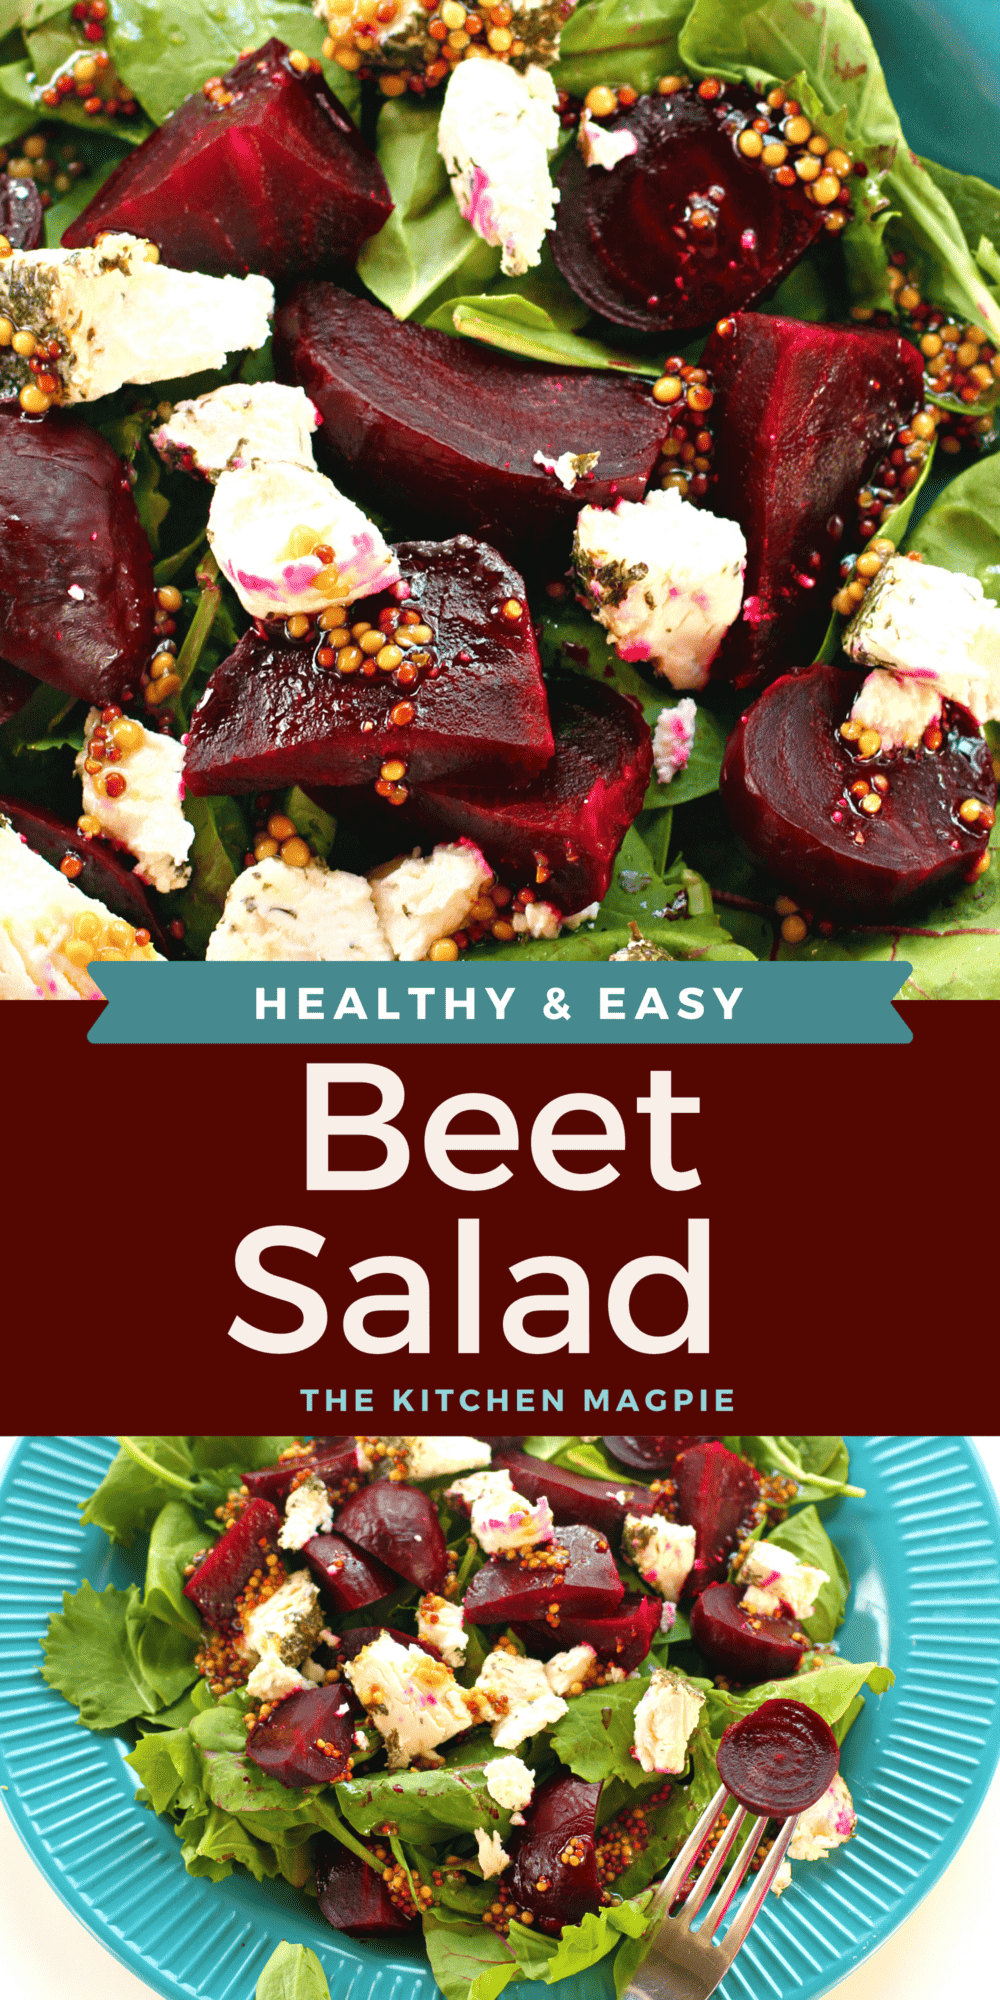 Delicious roasted beets are tossed with a maple syrup mustard dressing, then served with goat cheese and assorted greens.